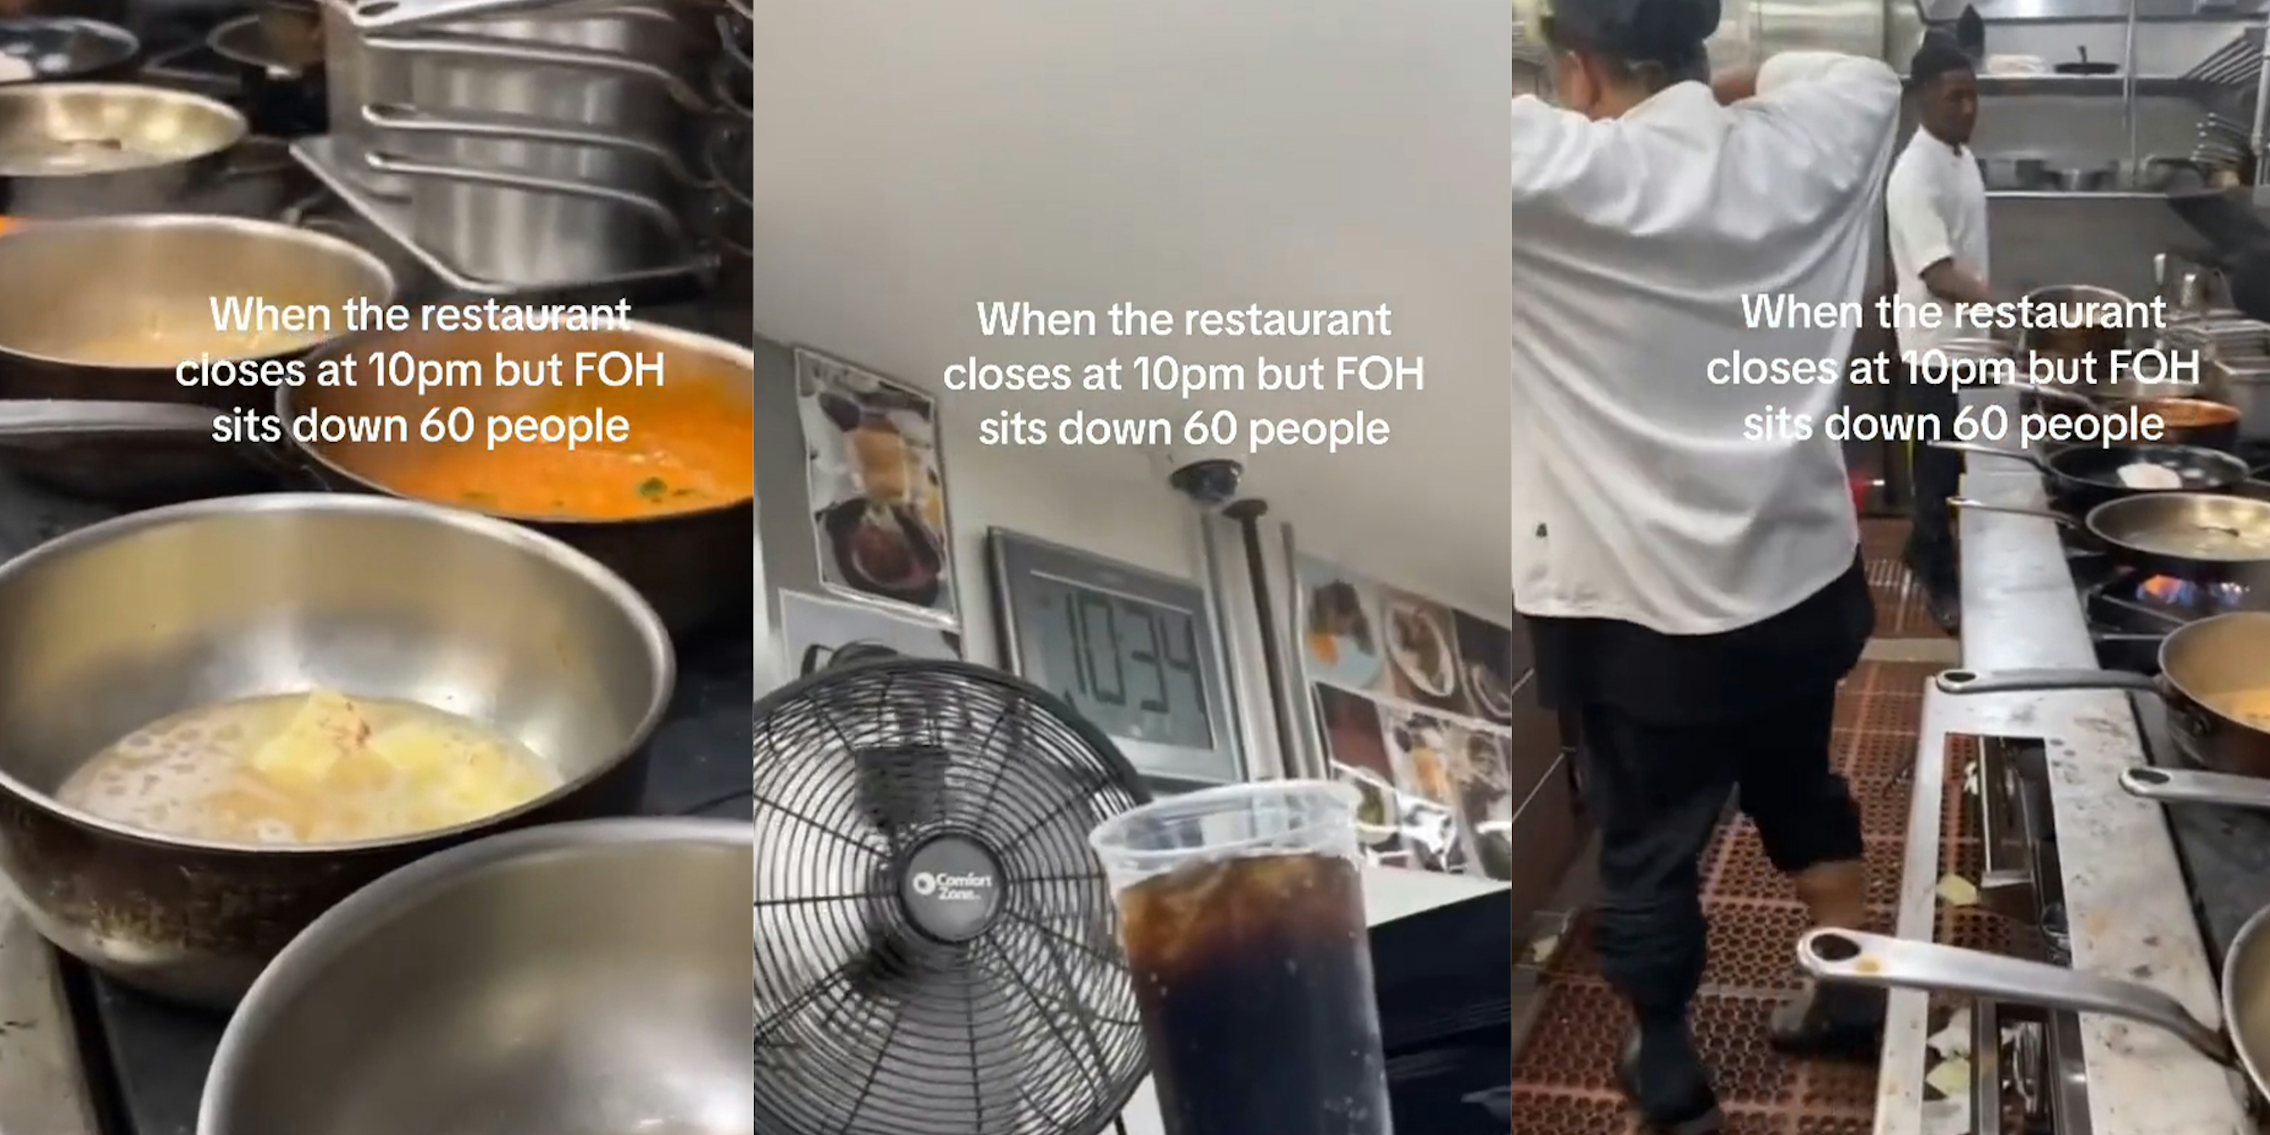 Line cook posts what his kitchen looks like at close. His restaurant just seated 60 people